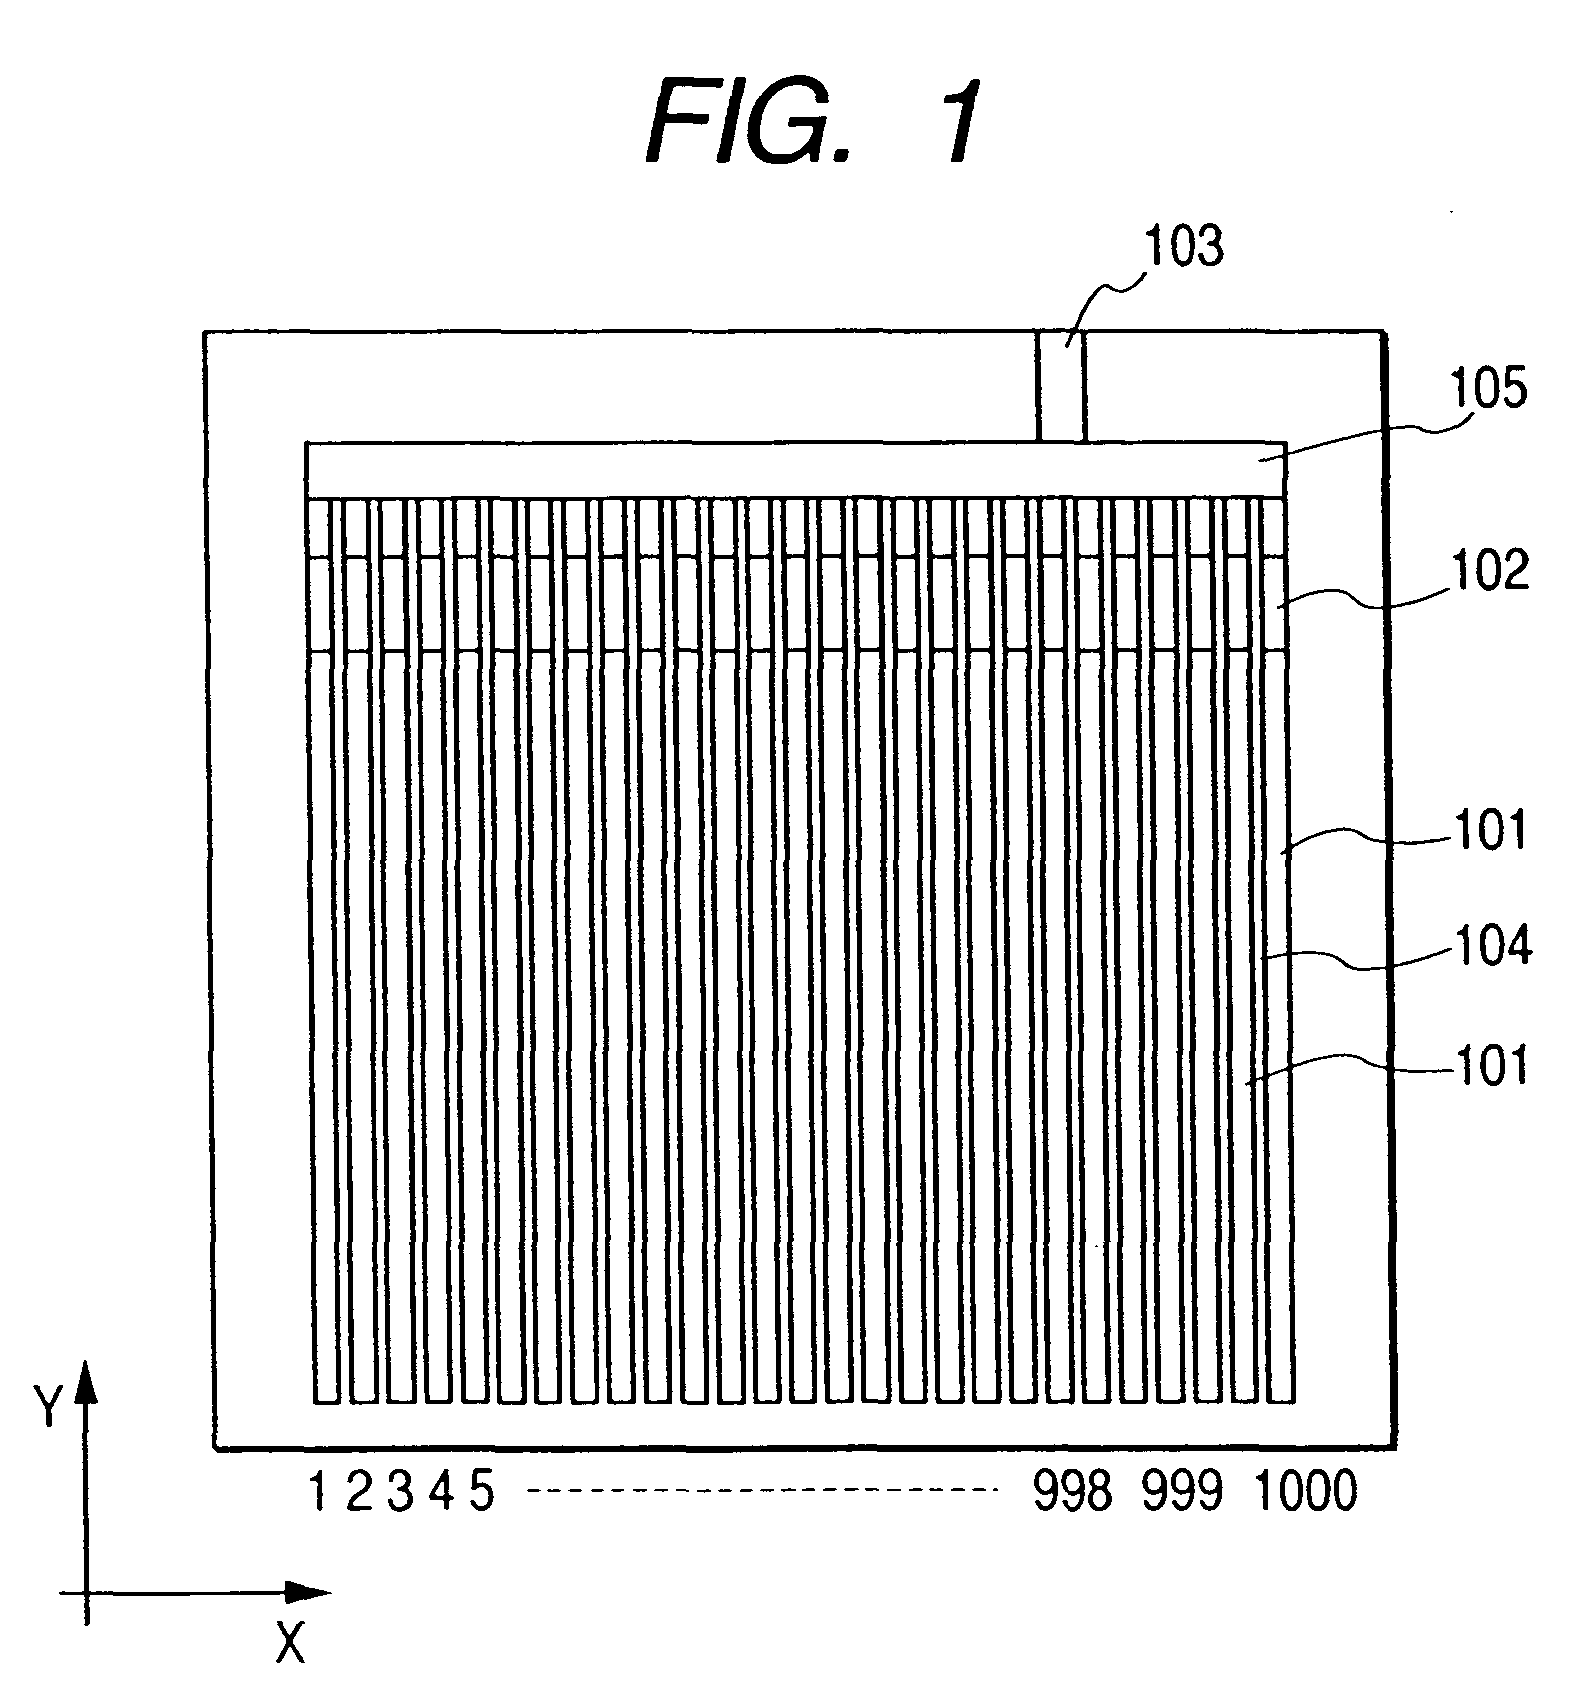 Electron emission apparatus comprising electron-emitting devices, image forming apparatus and voltage application apparatus for applying voltage between electrodes